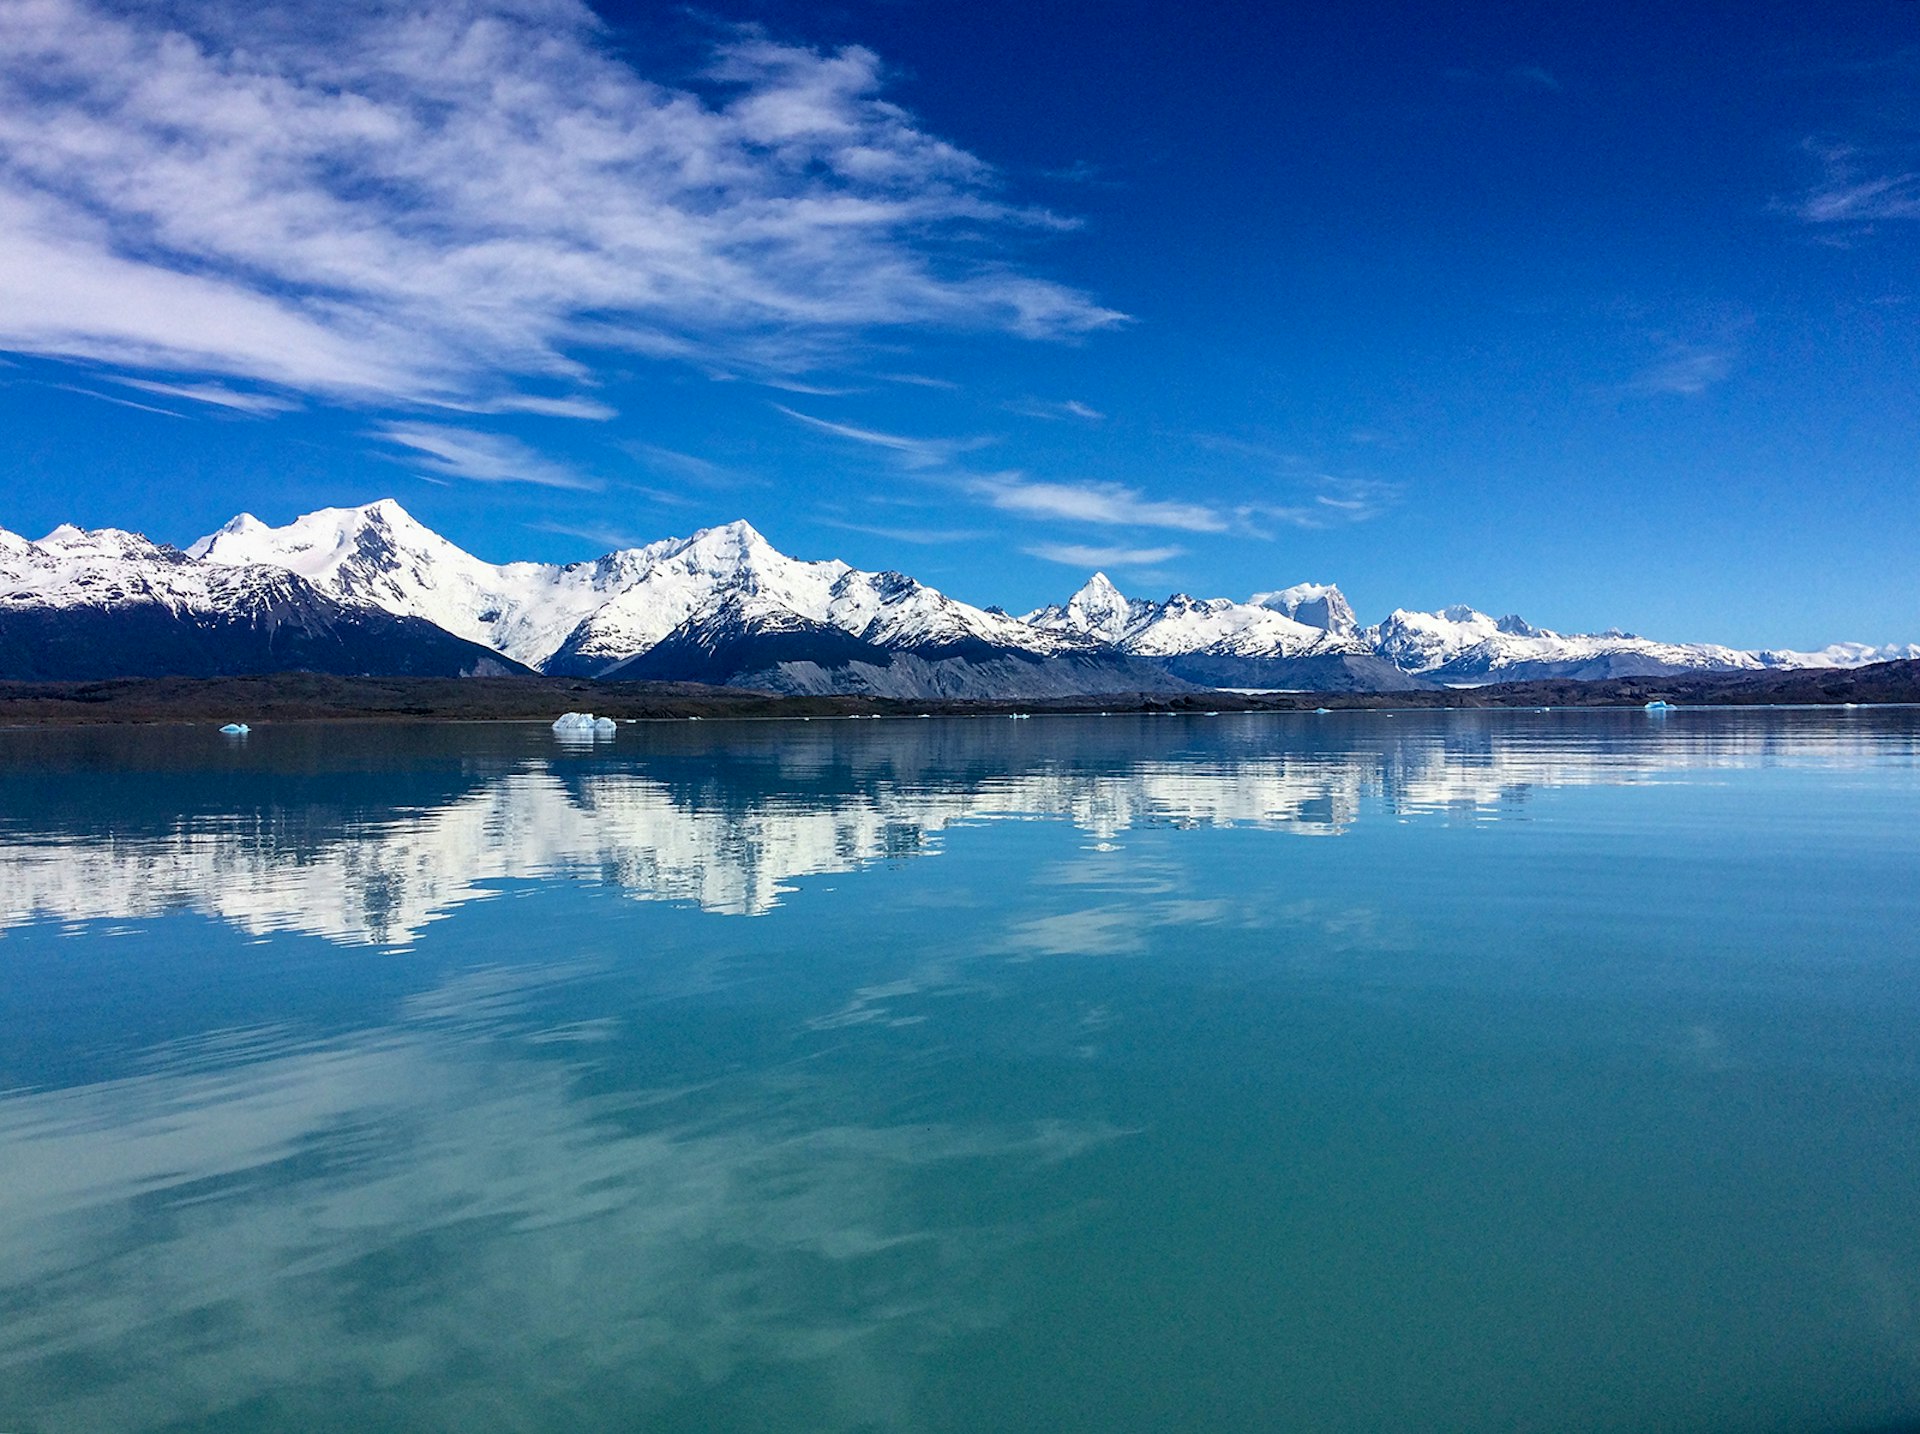 Mountains and blue sky reflect on a glassy lake